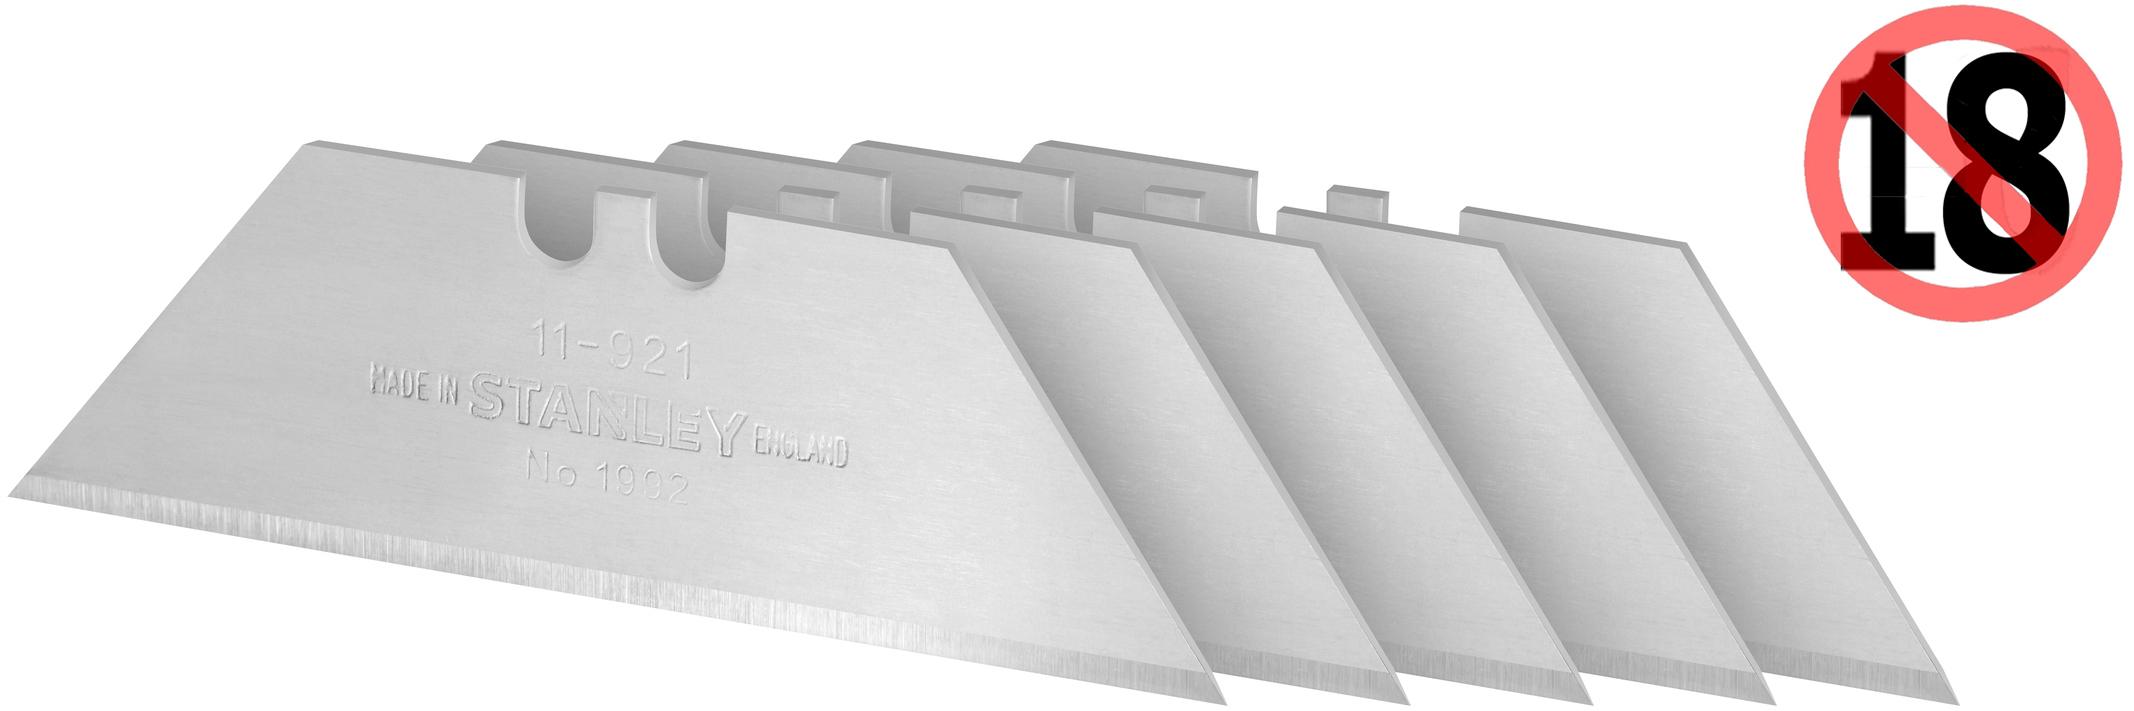 Stanley 1992 Heavy Duty Blades 5 Pack